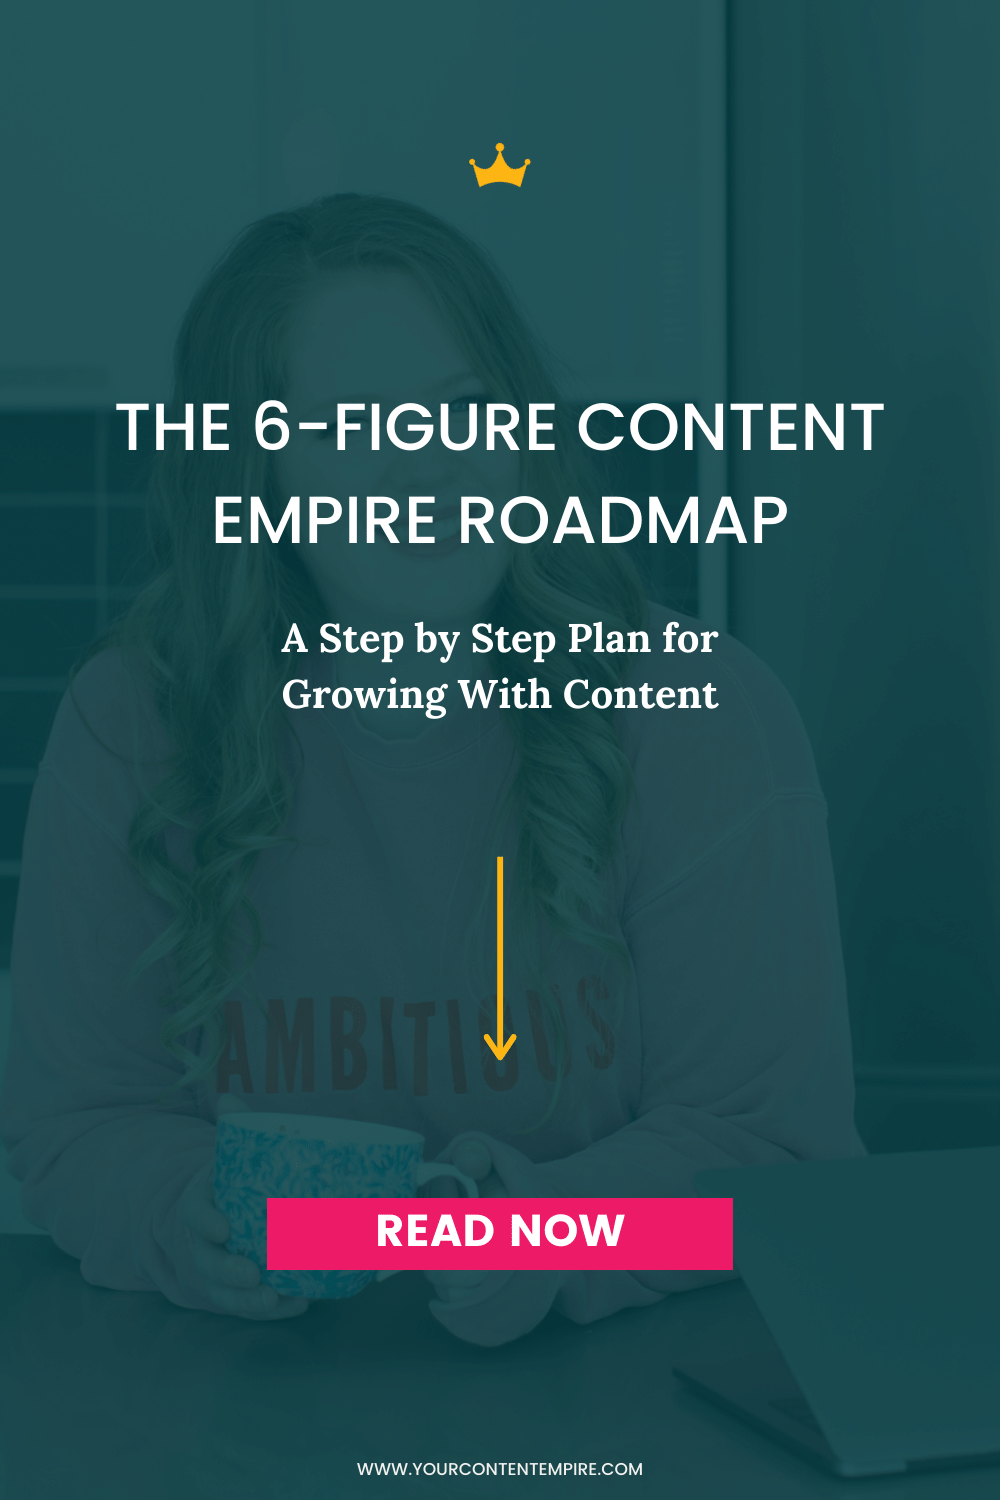 The 6-Figure Content Empire Roadmap: A Step by Step Plan for Growing With Content by Your Content Empire